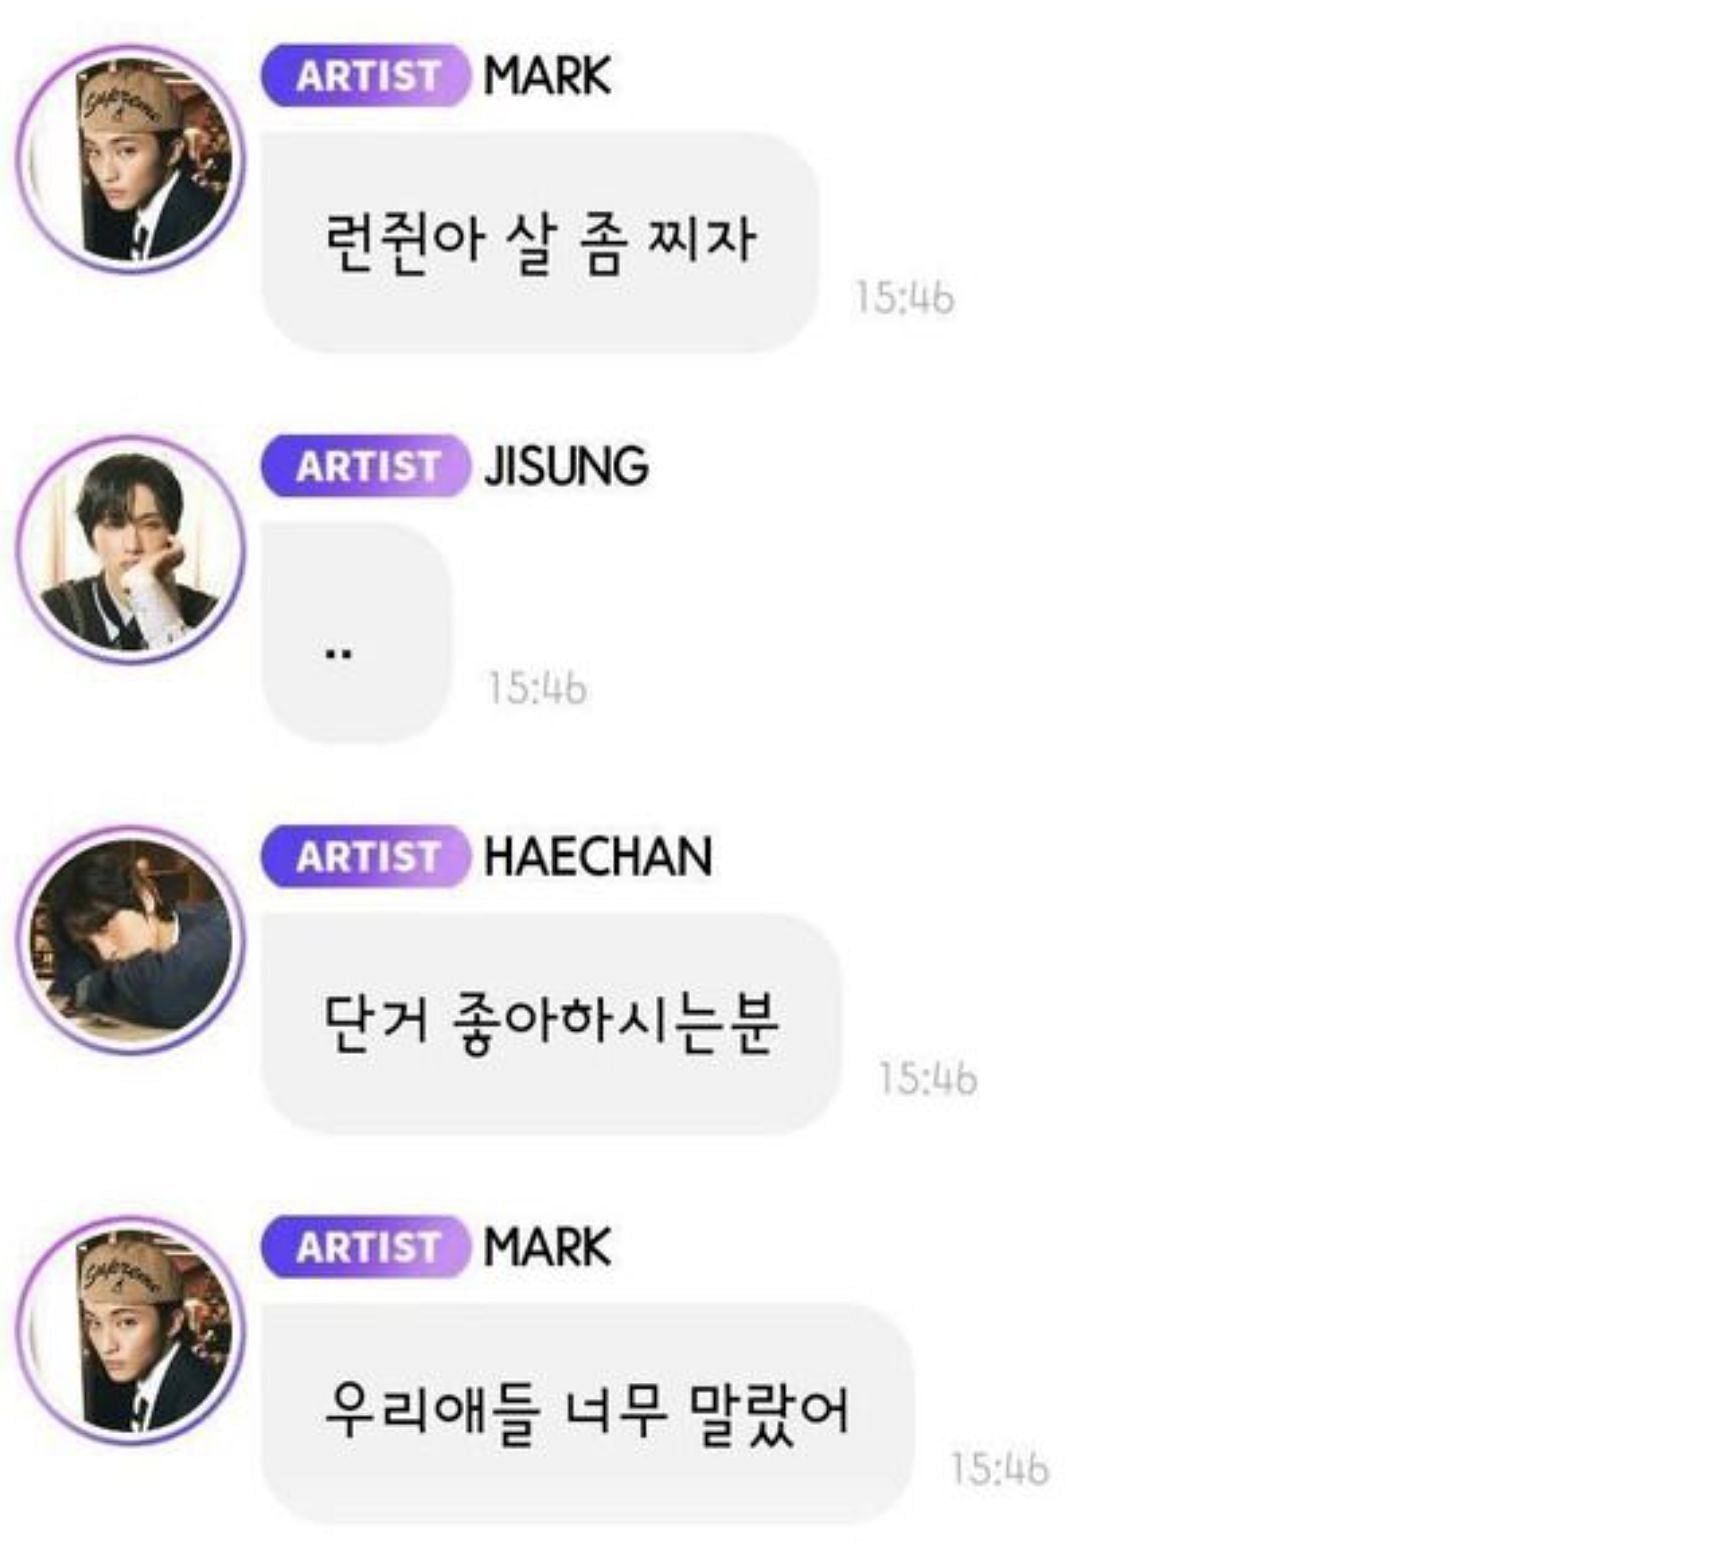 NCT&#039;s Mark, Haechan, and Jisung&#039;s conversation in Bubble (Image via Twitter)